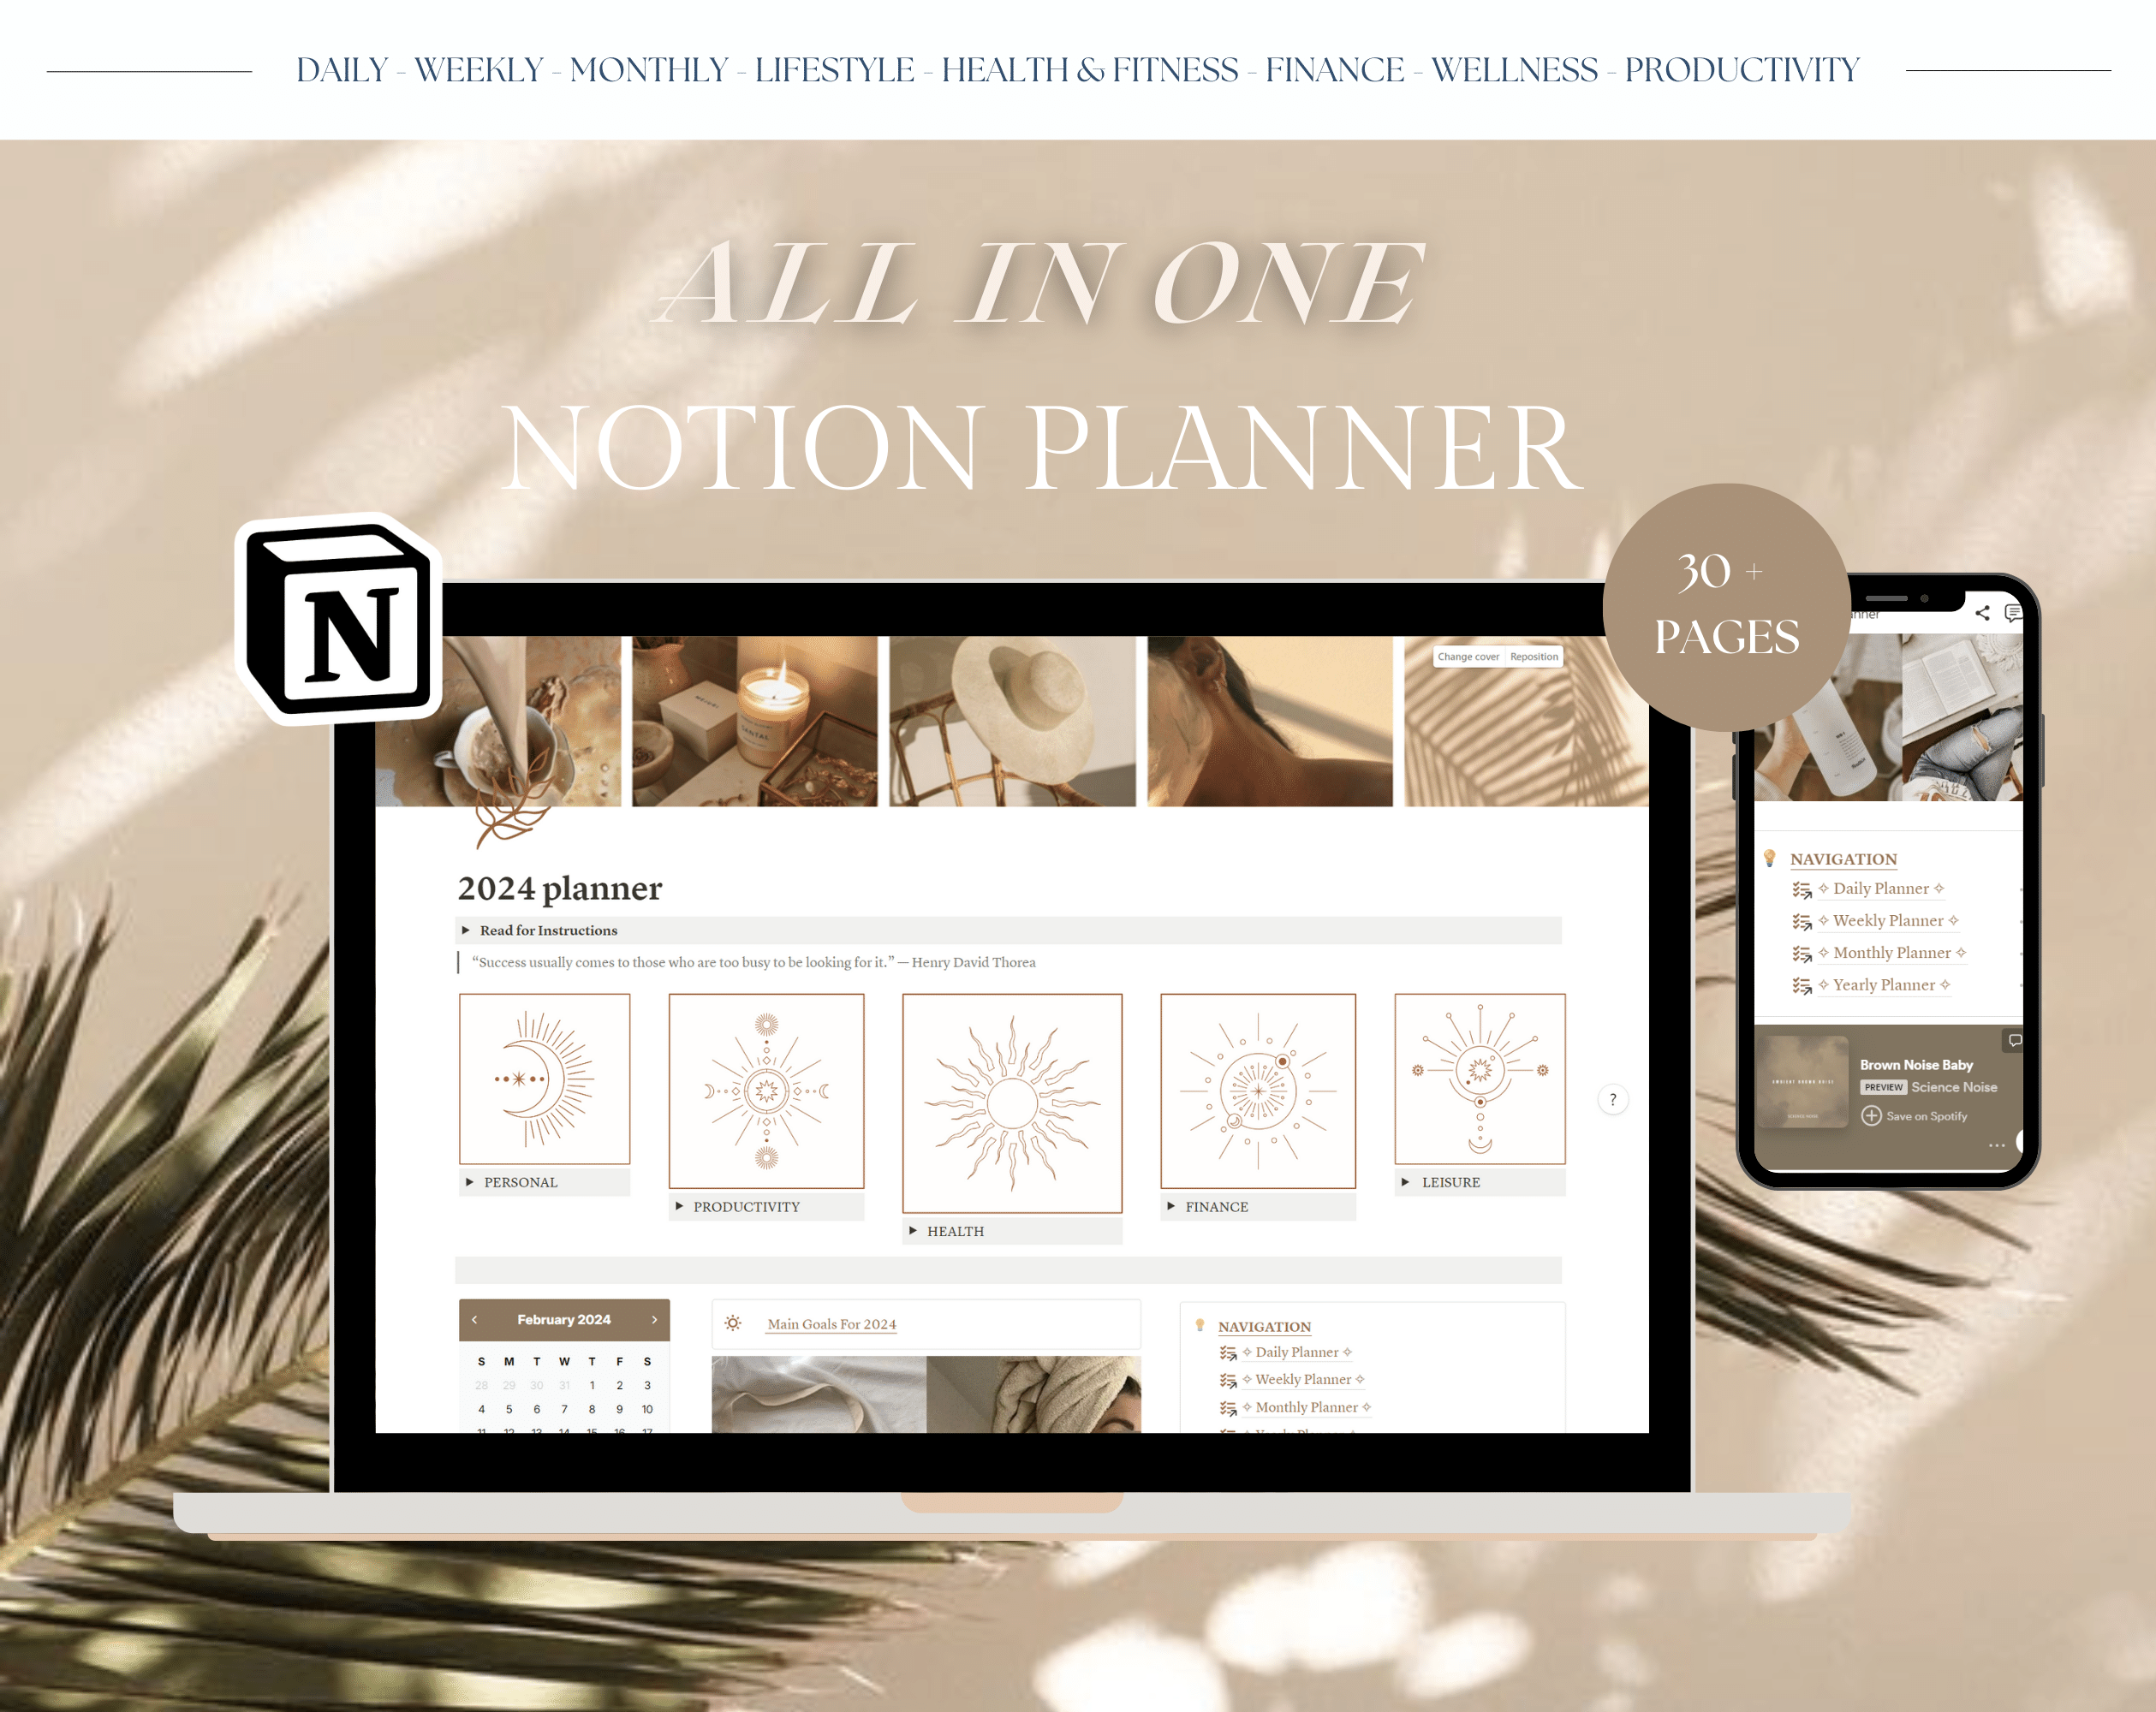 This notion template is your all-in-one life planner and goal tracker. Including the full Ultimate Life Planner 2024 template combined with the 12 Week Year Planner, this notion set is absolutely complete.